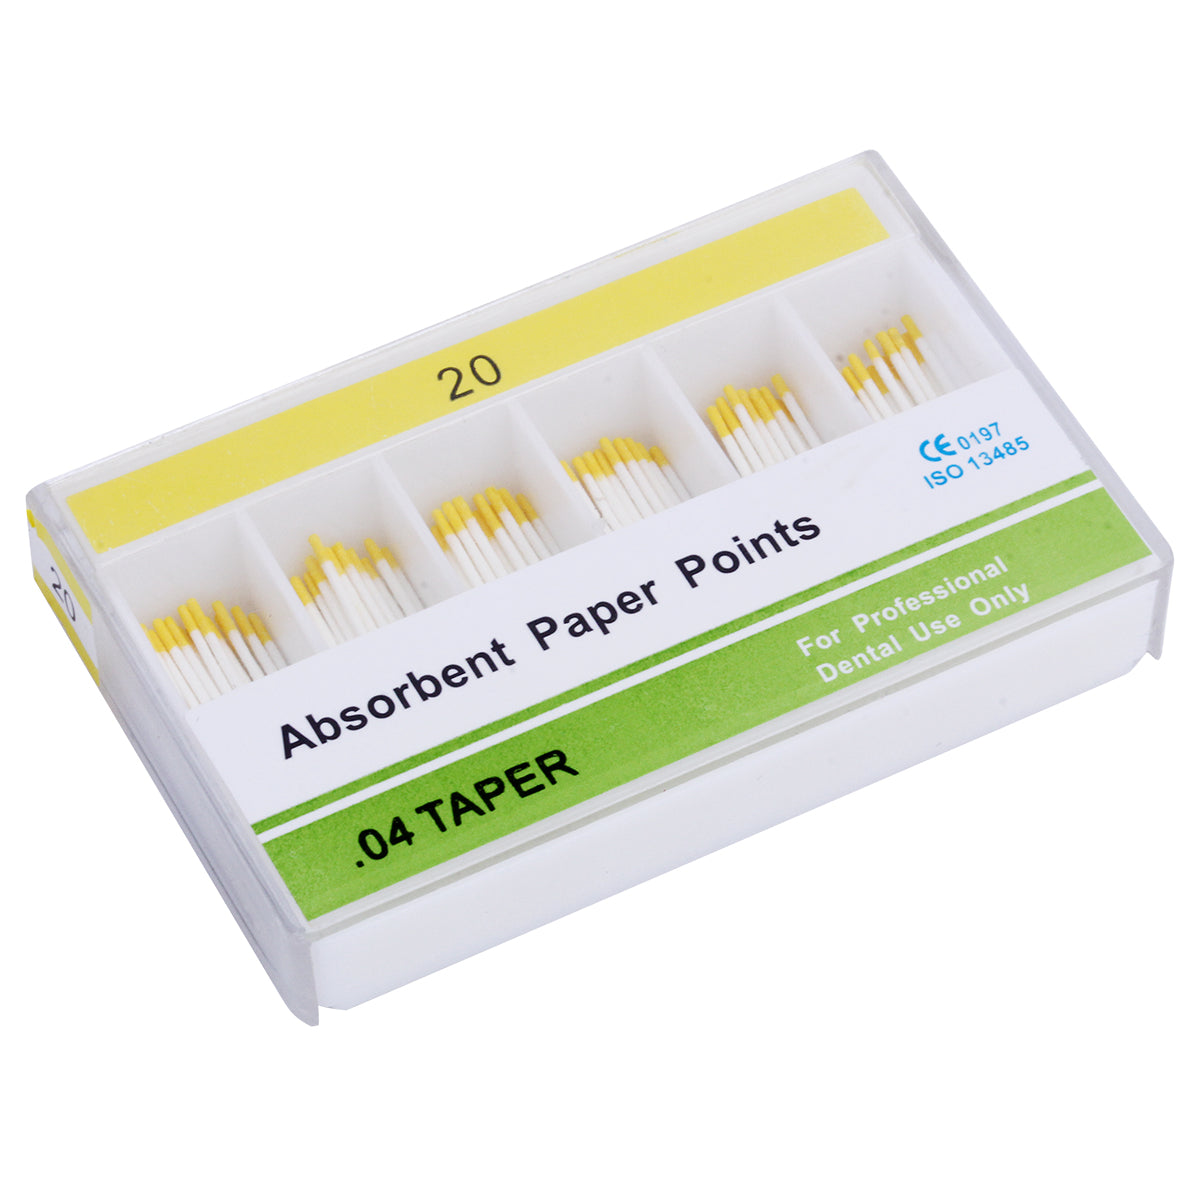 Absorbent Paper Points #15-40 Taper Size 0.04 Color Coded 7 Models 100/Box-azdentall.com